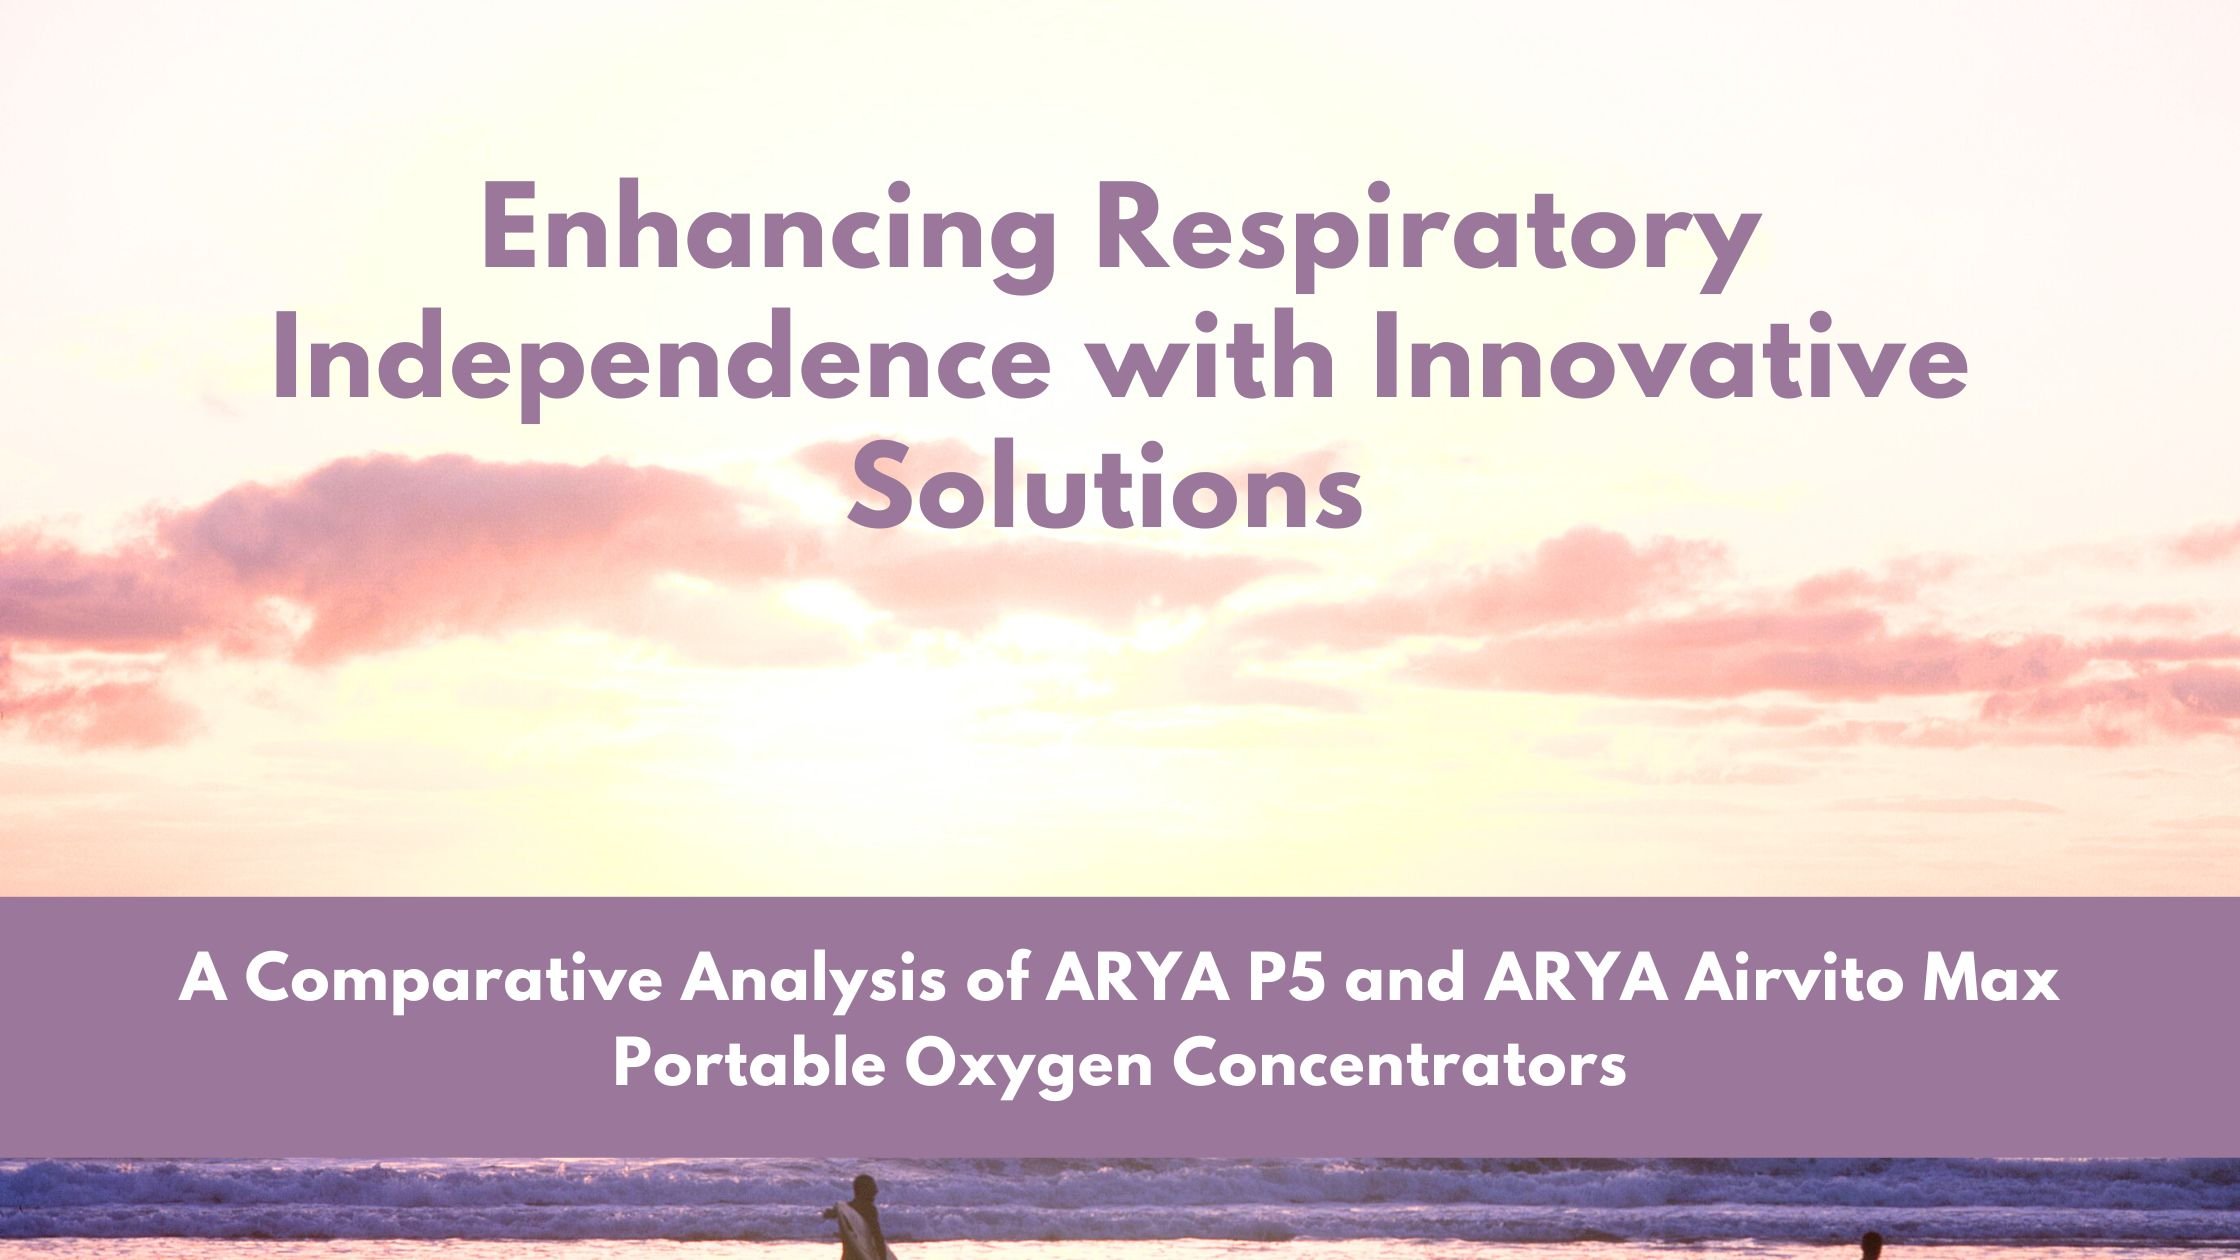 Enhancing Respiratory Independence with Innovative Solutions - A Comparative Analysis of ARYA P5 and ARYA Airvito Max Portable Oxygen Concentrators